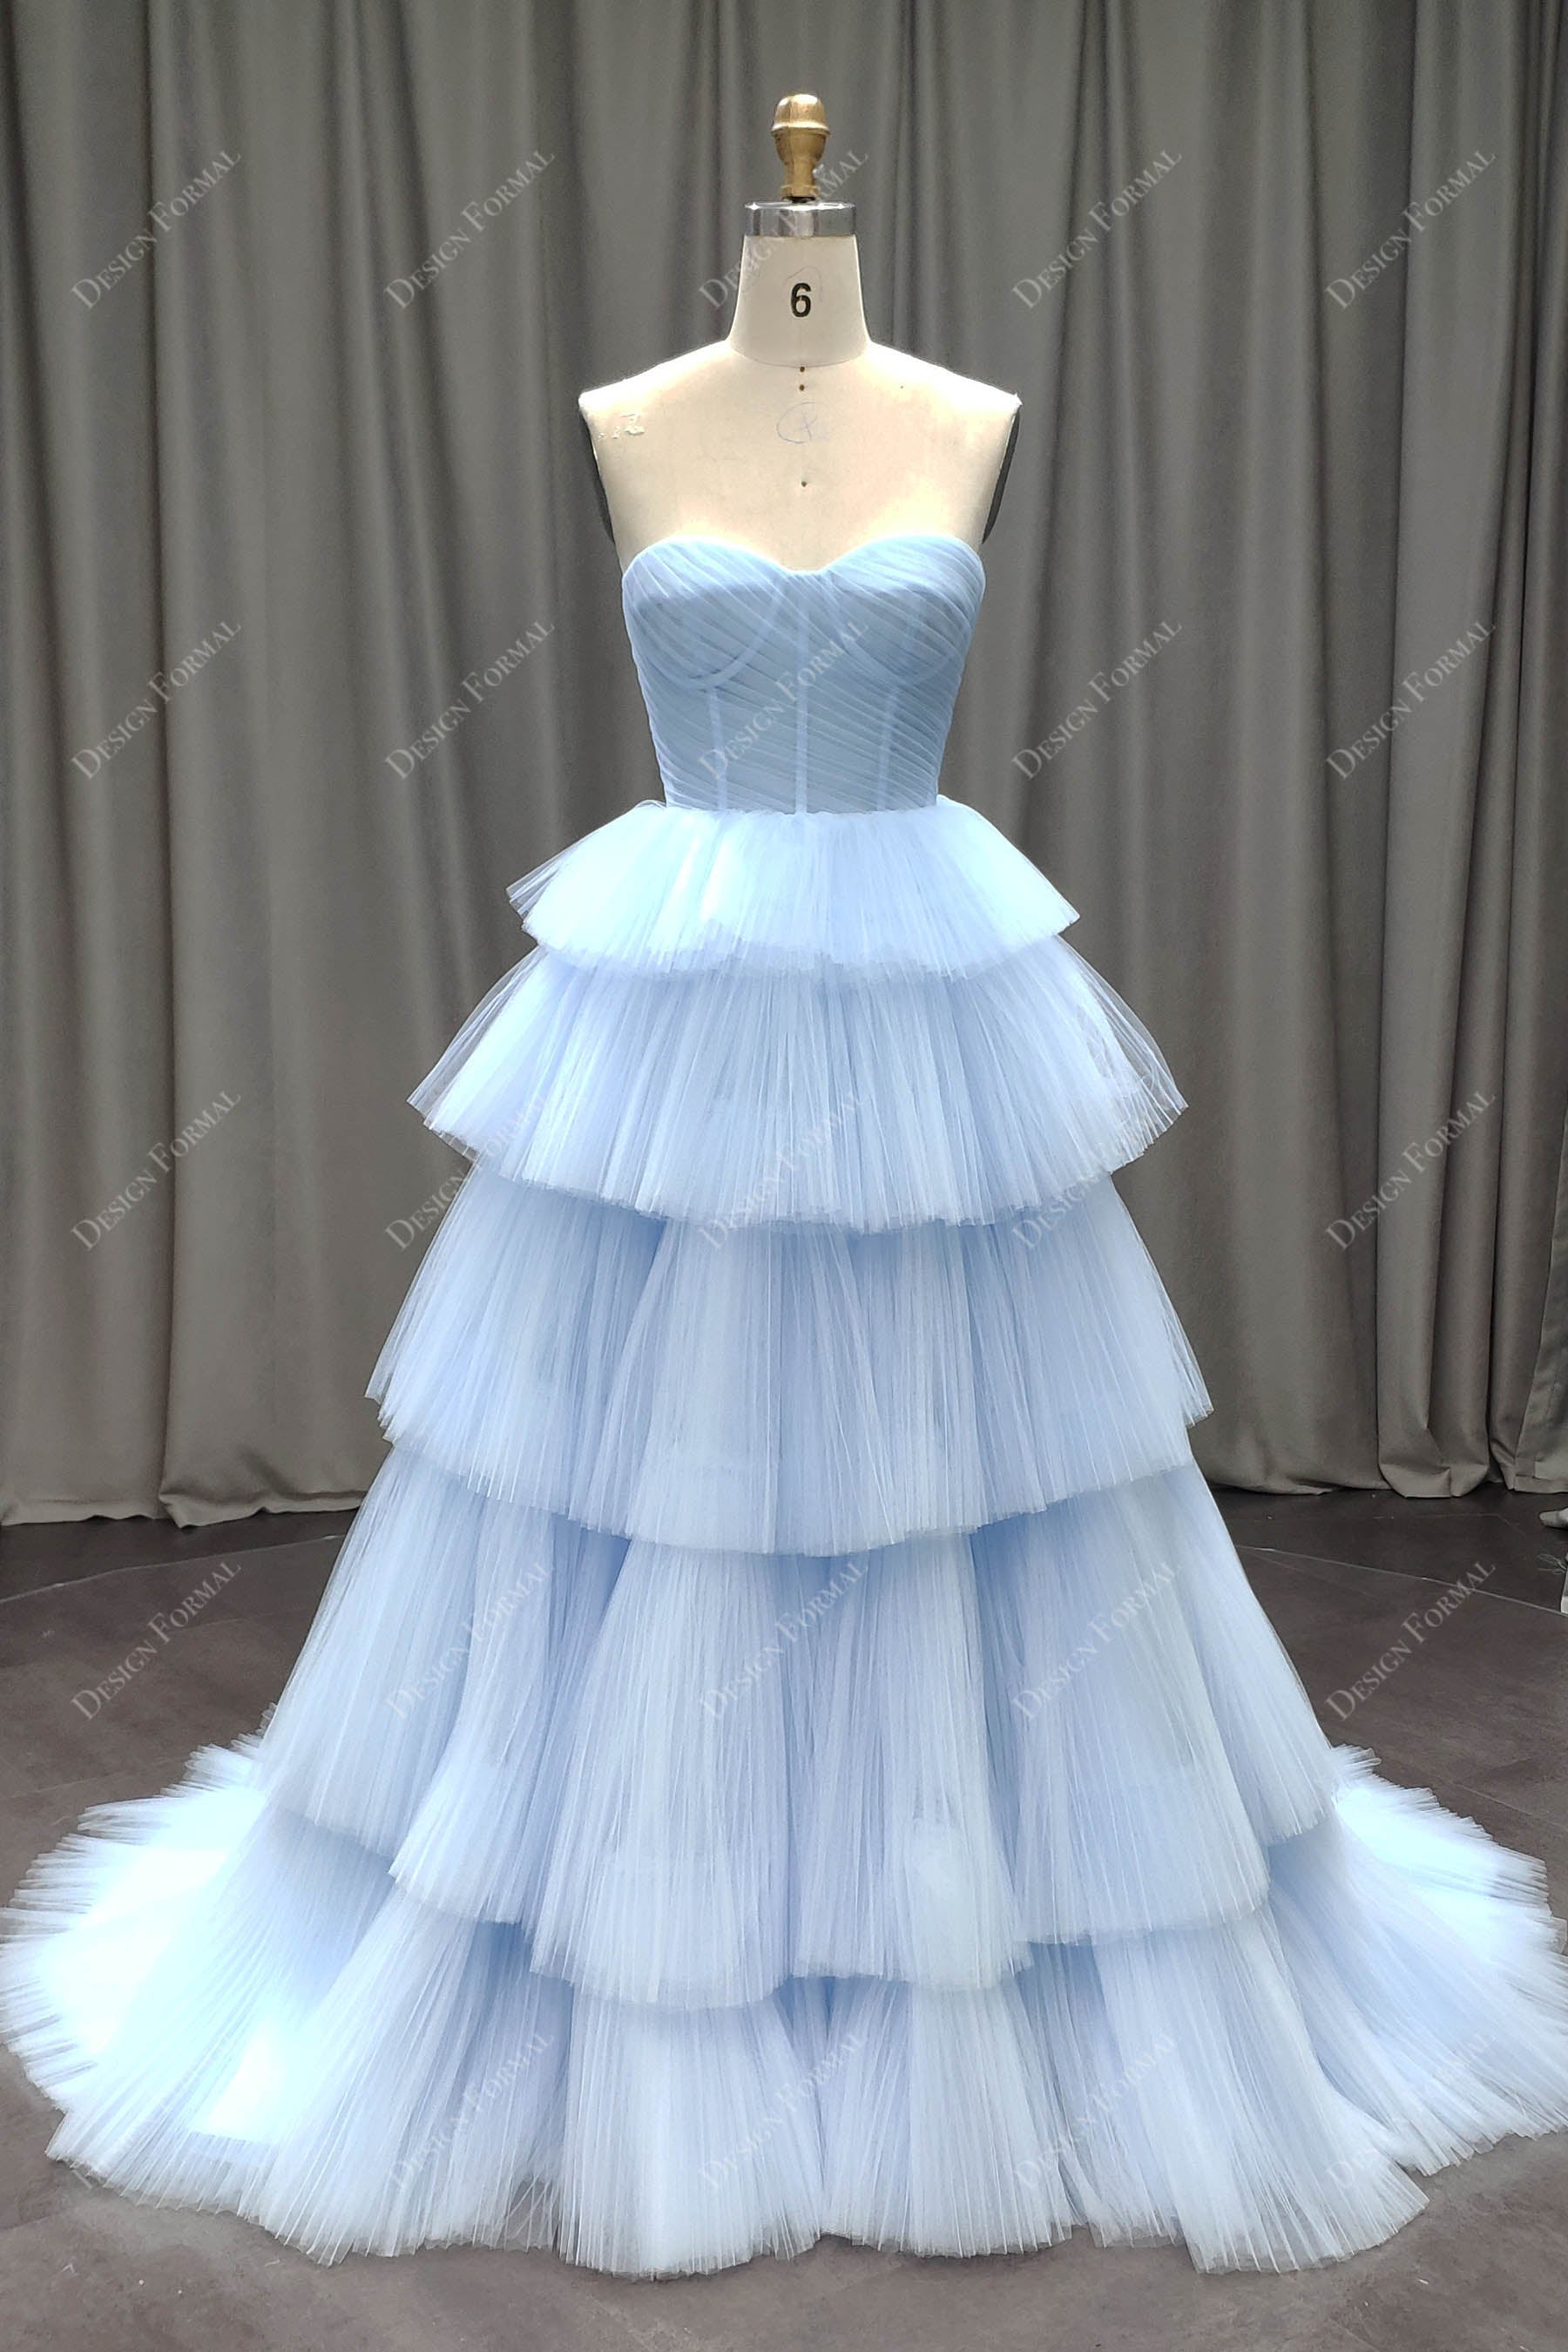 Sky Blue Tiered Pleated Tulle Corset Quinceanera Prom Dress